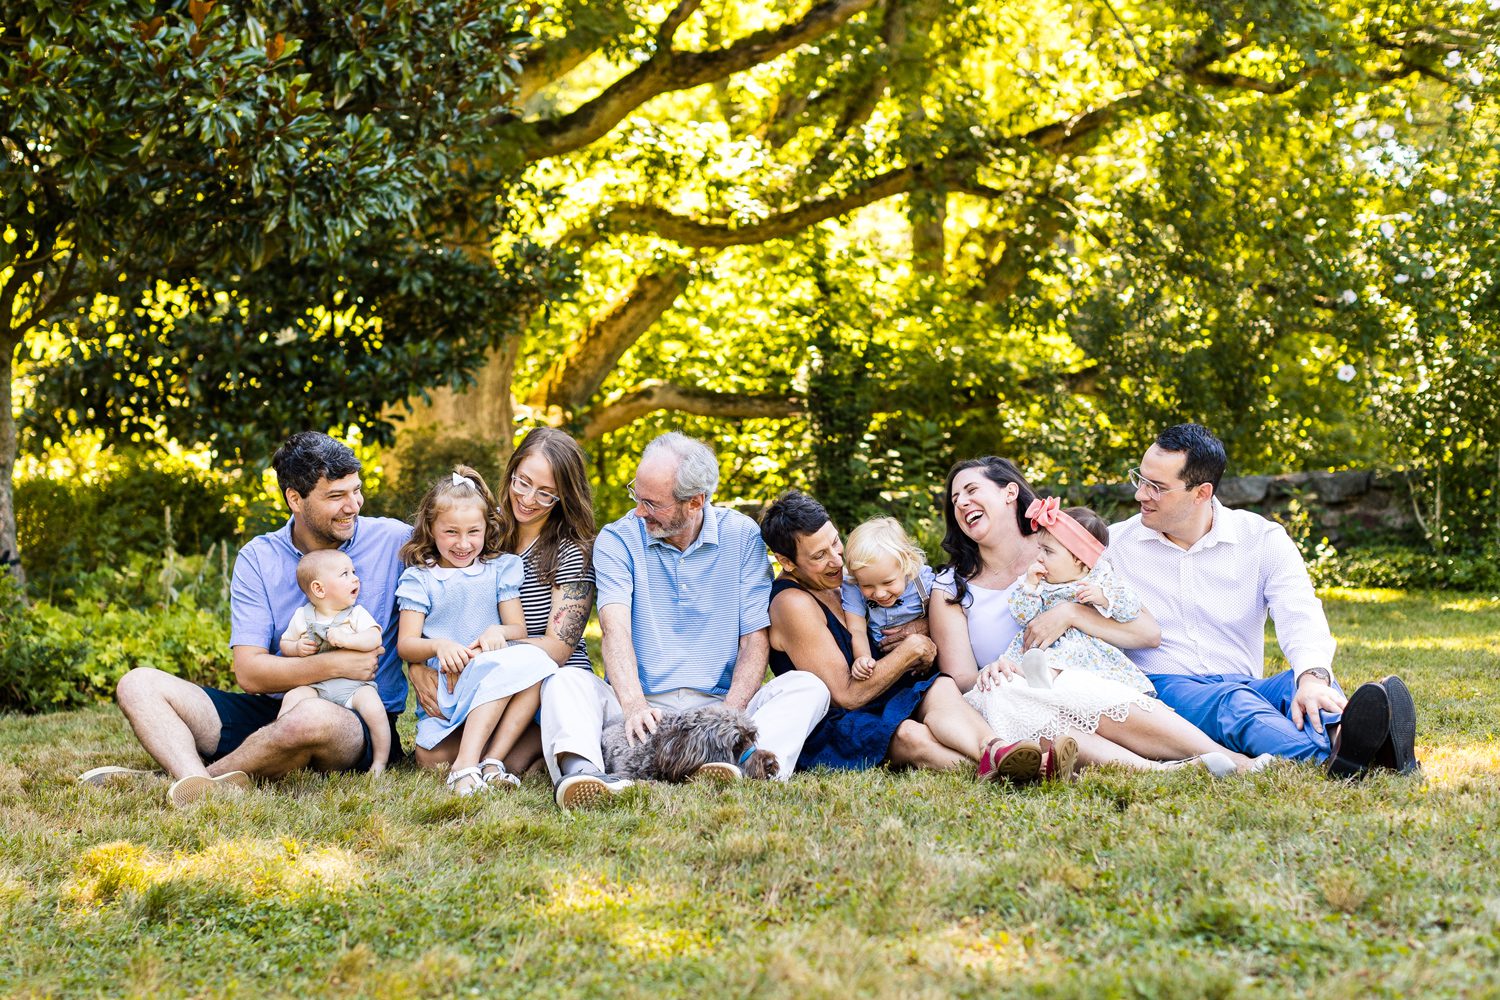 Candid extended family photo, sitting on the grass laughing and smiling with each other